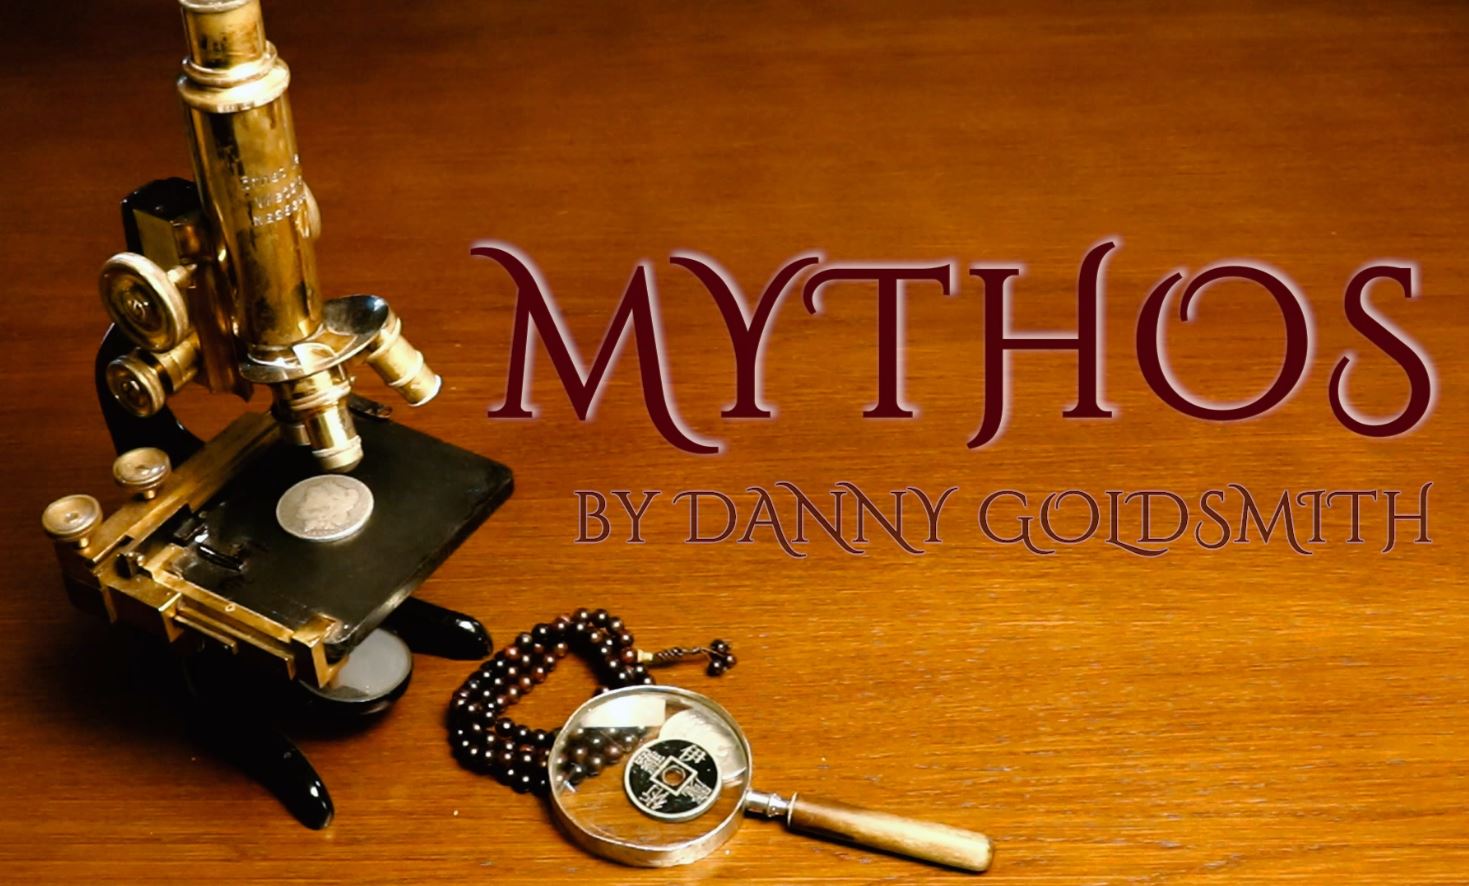 Mythos by Danny Goldsmith (MP4 Video Download 1080p FullHD Quality)